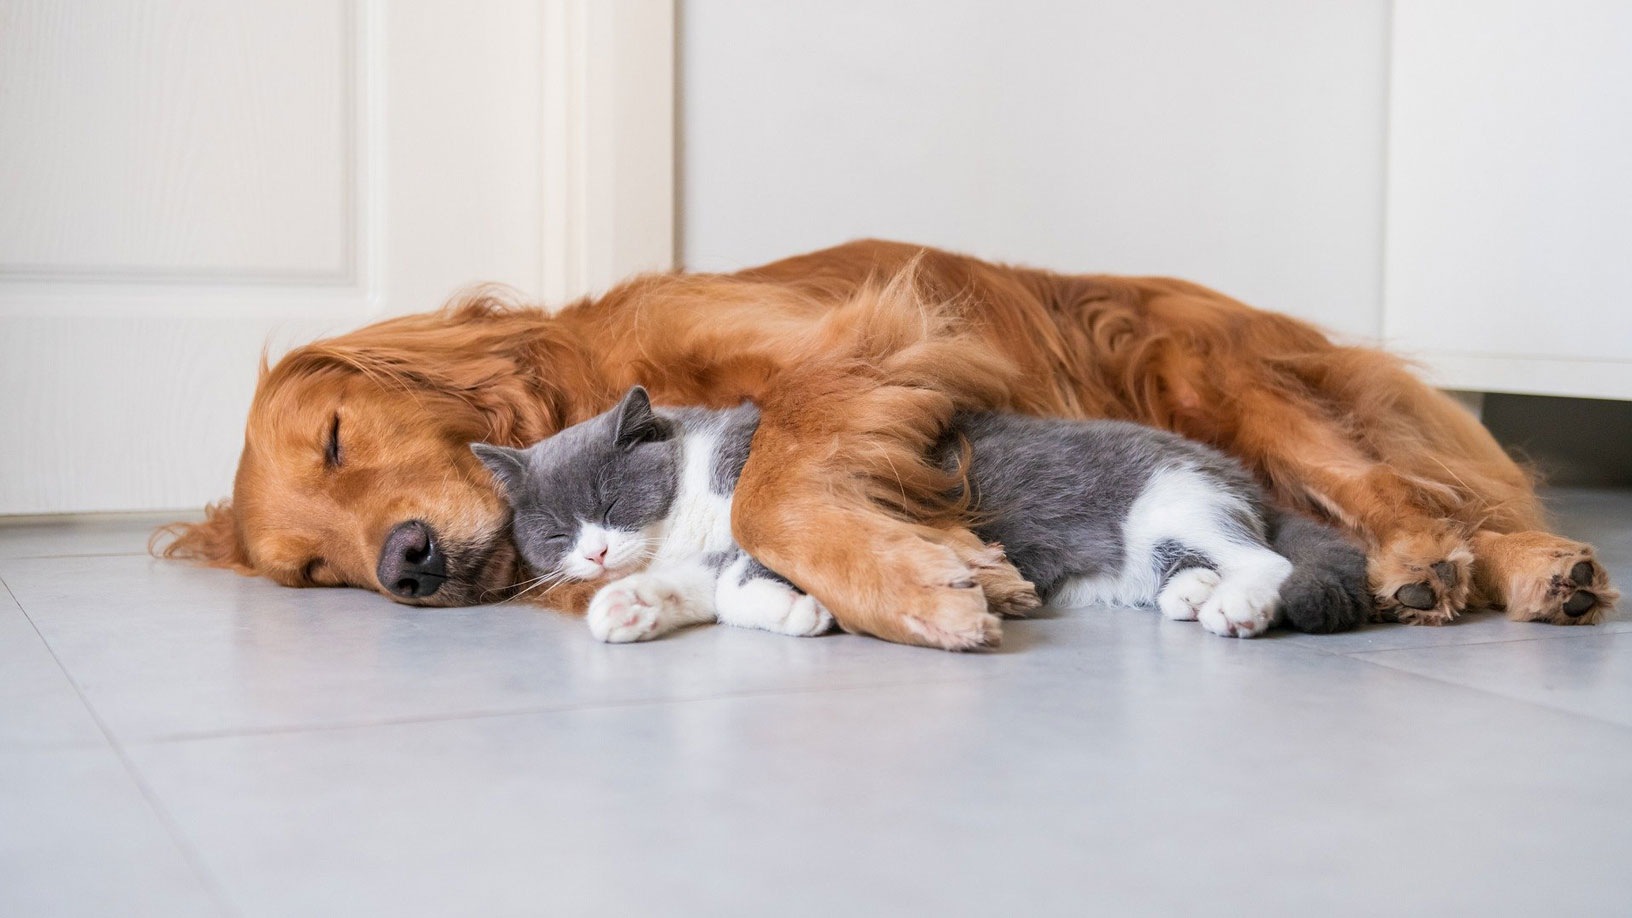 dog and cat cuddling together, while sleeping